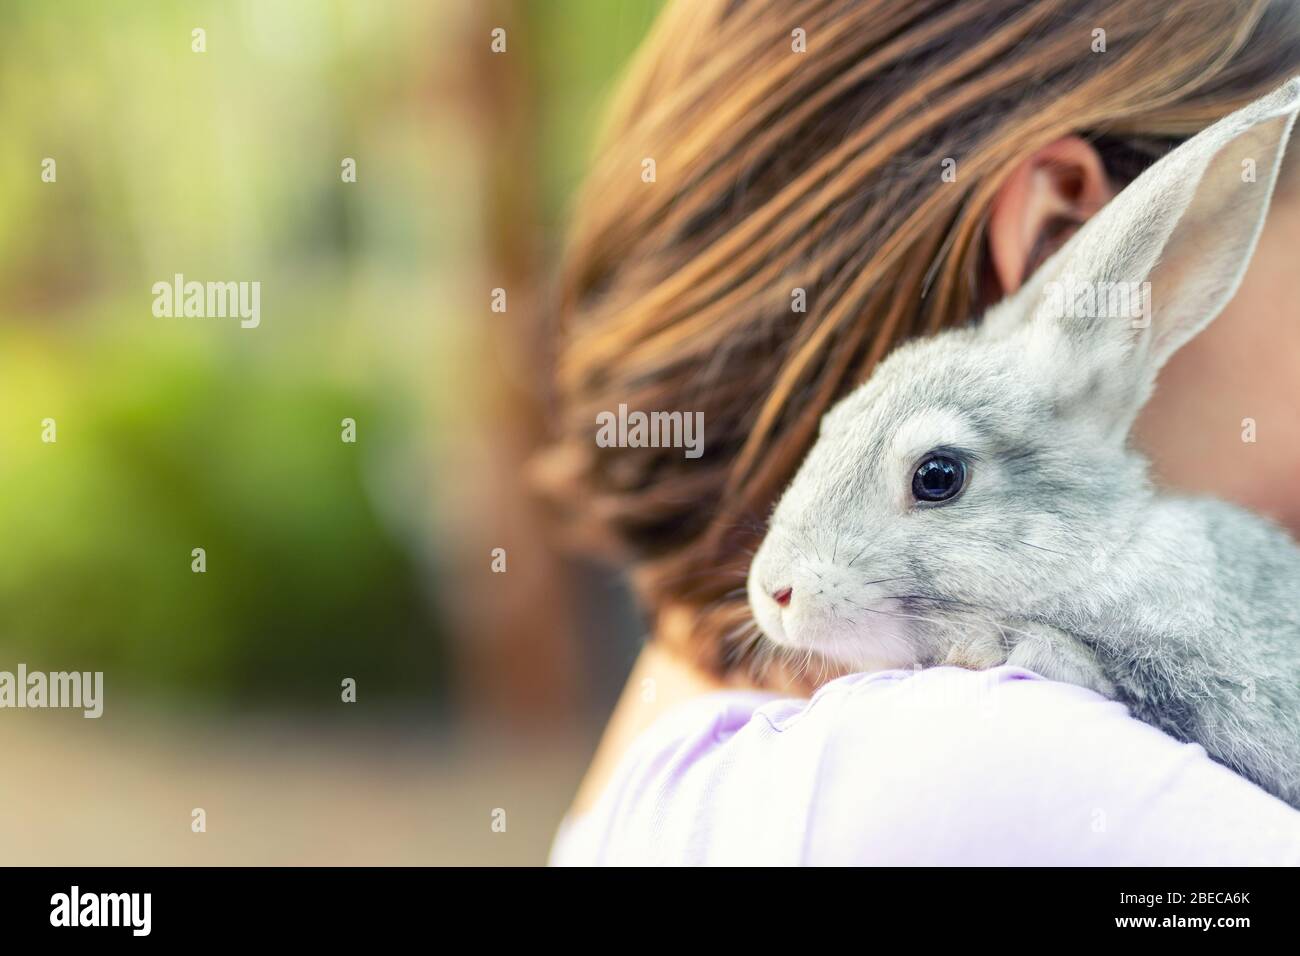 Cute adorable sweet little rabbit sitting on shoulder of young adult brunette woman at warm sunset time country outdoors. Animal friendship and care Stock Photo